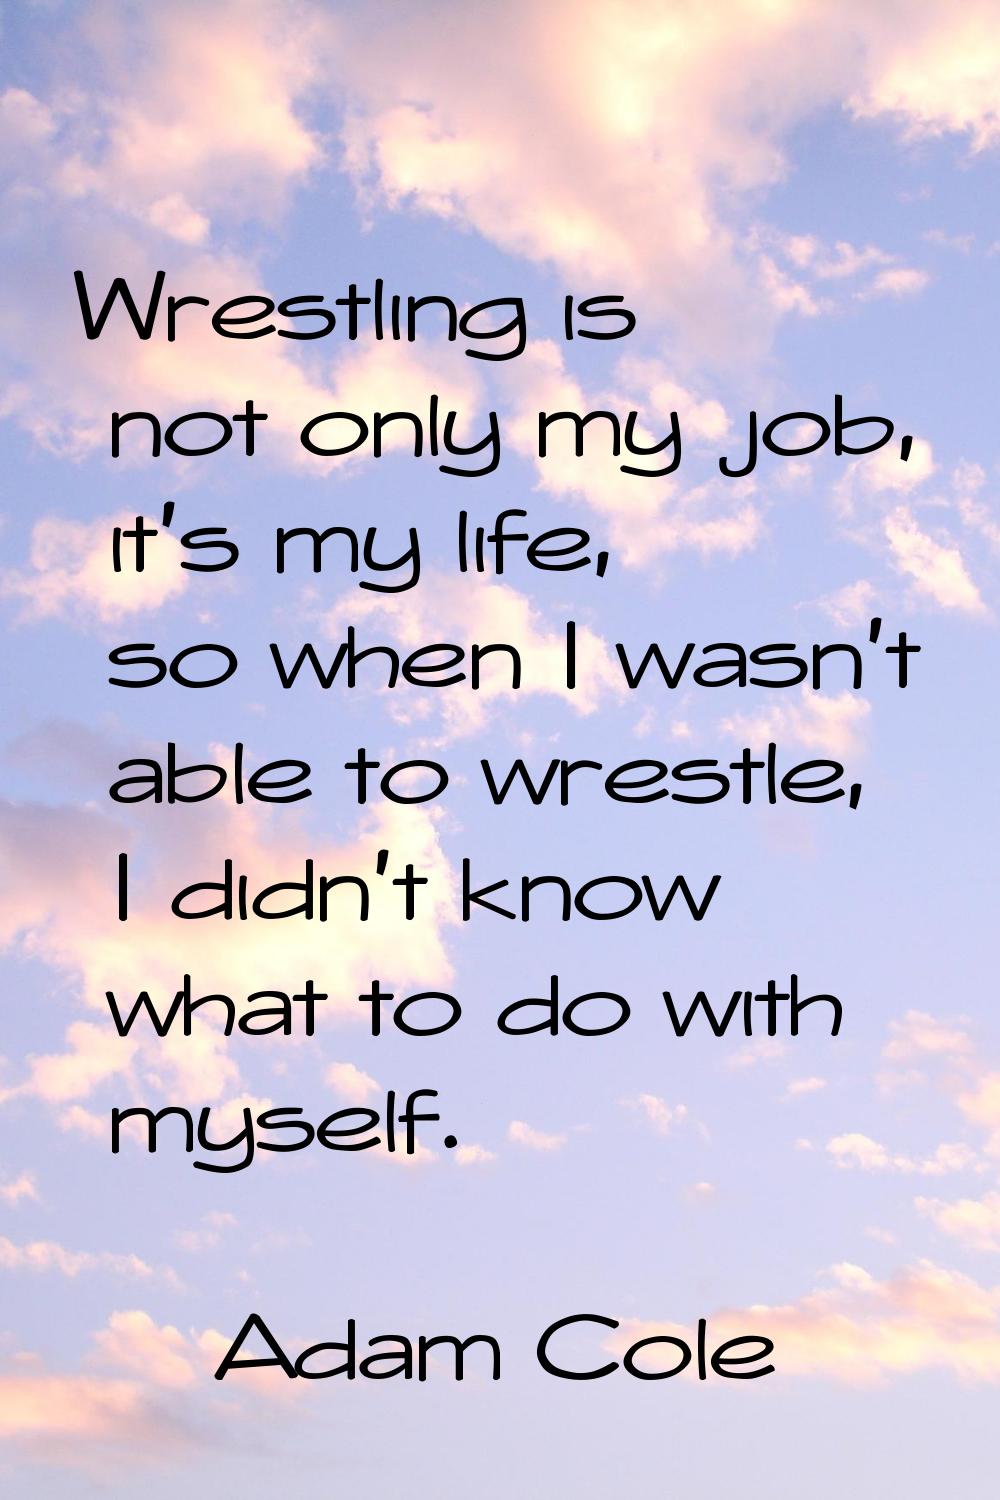 Wrestling is not only my job, it's my life, so when I wasn't able to wrestle, I didn't know what to